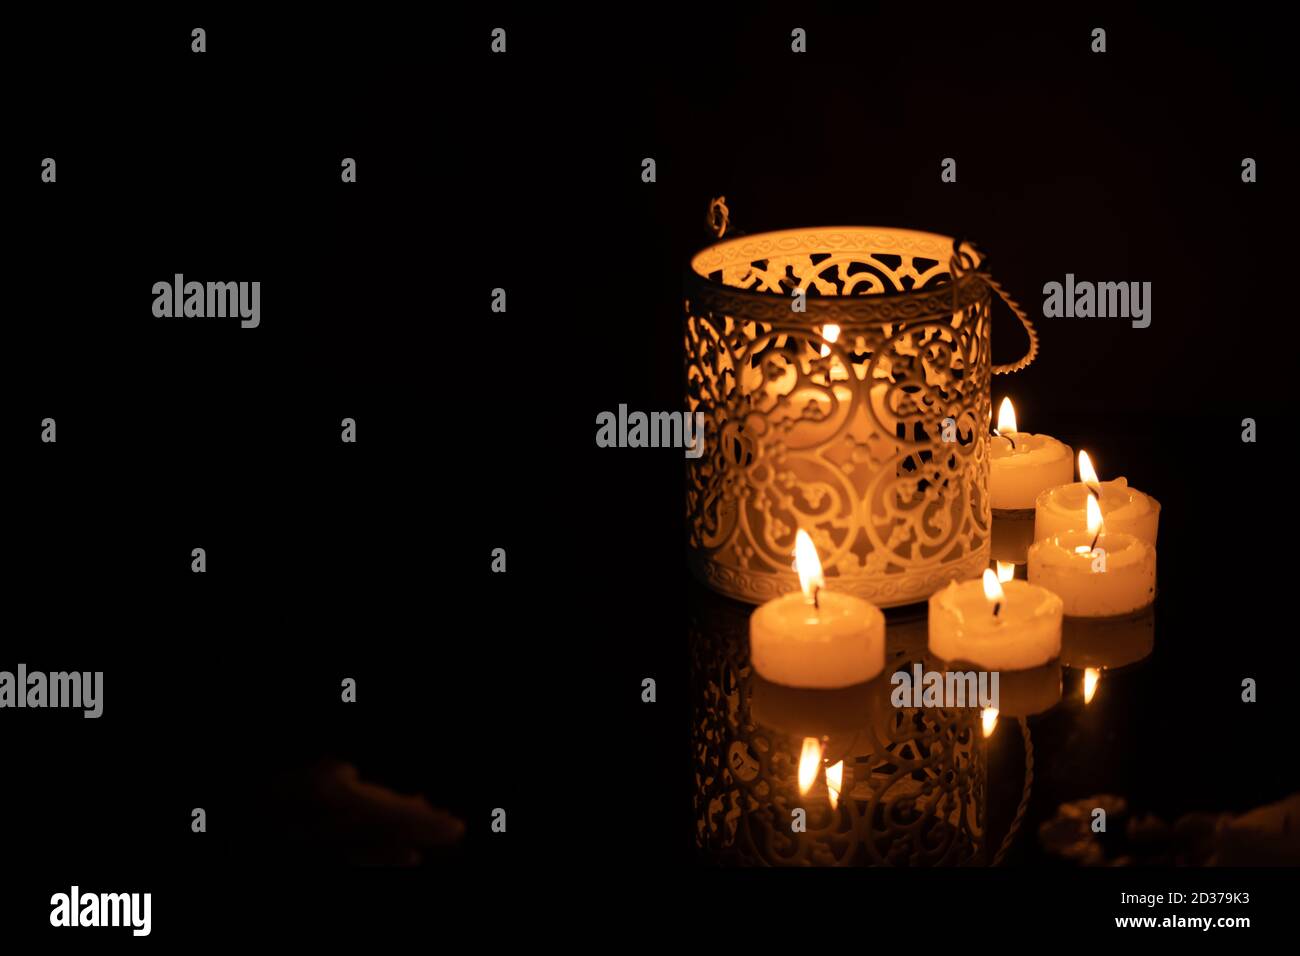 Intrincate metal candle holder with a lighting scented candle are displayed on the blak stone table in the dark living room. Stock Photo